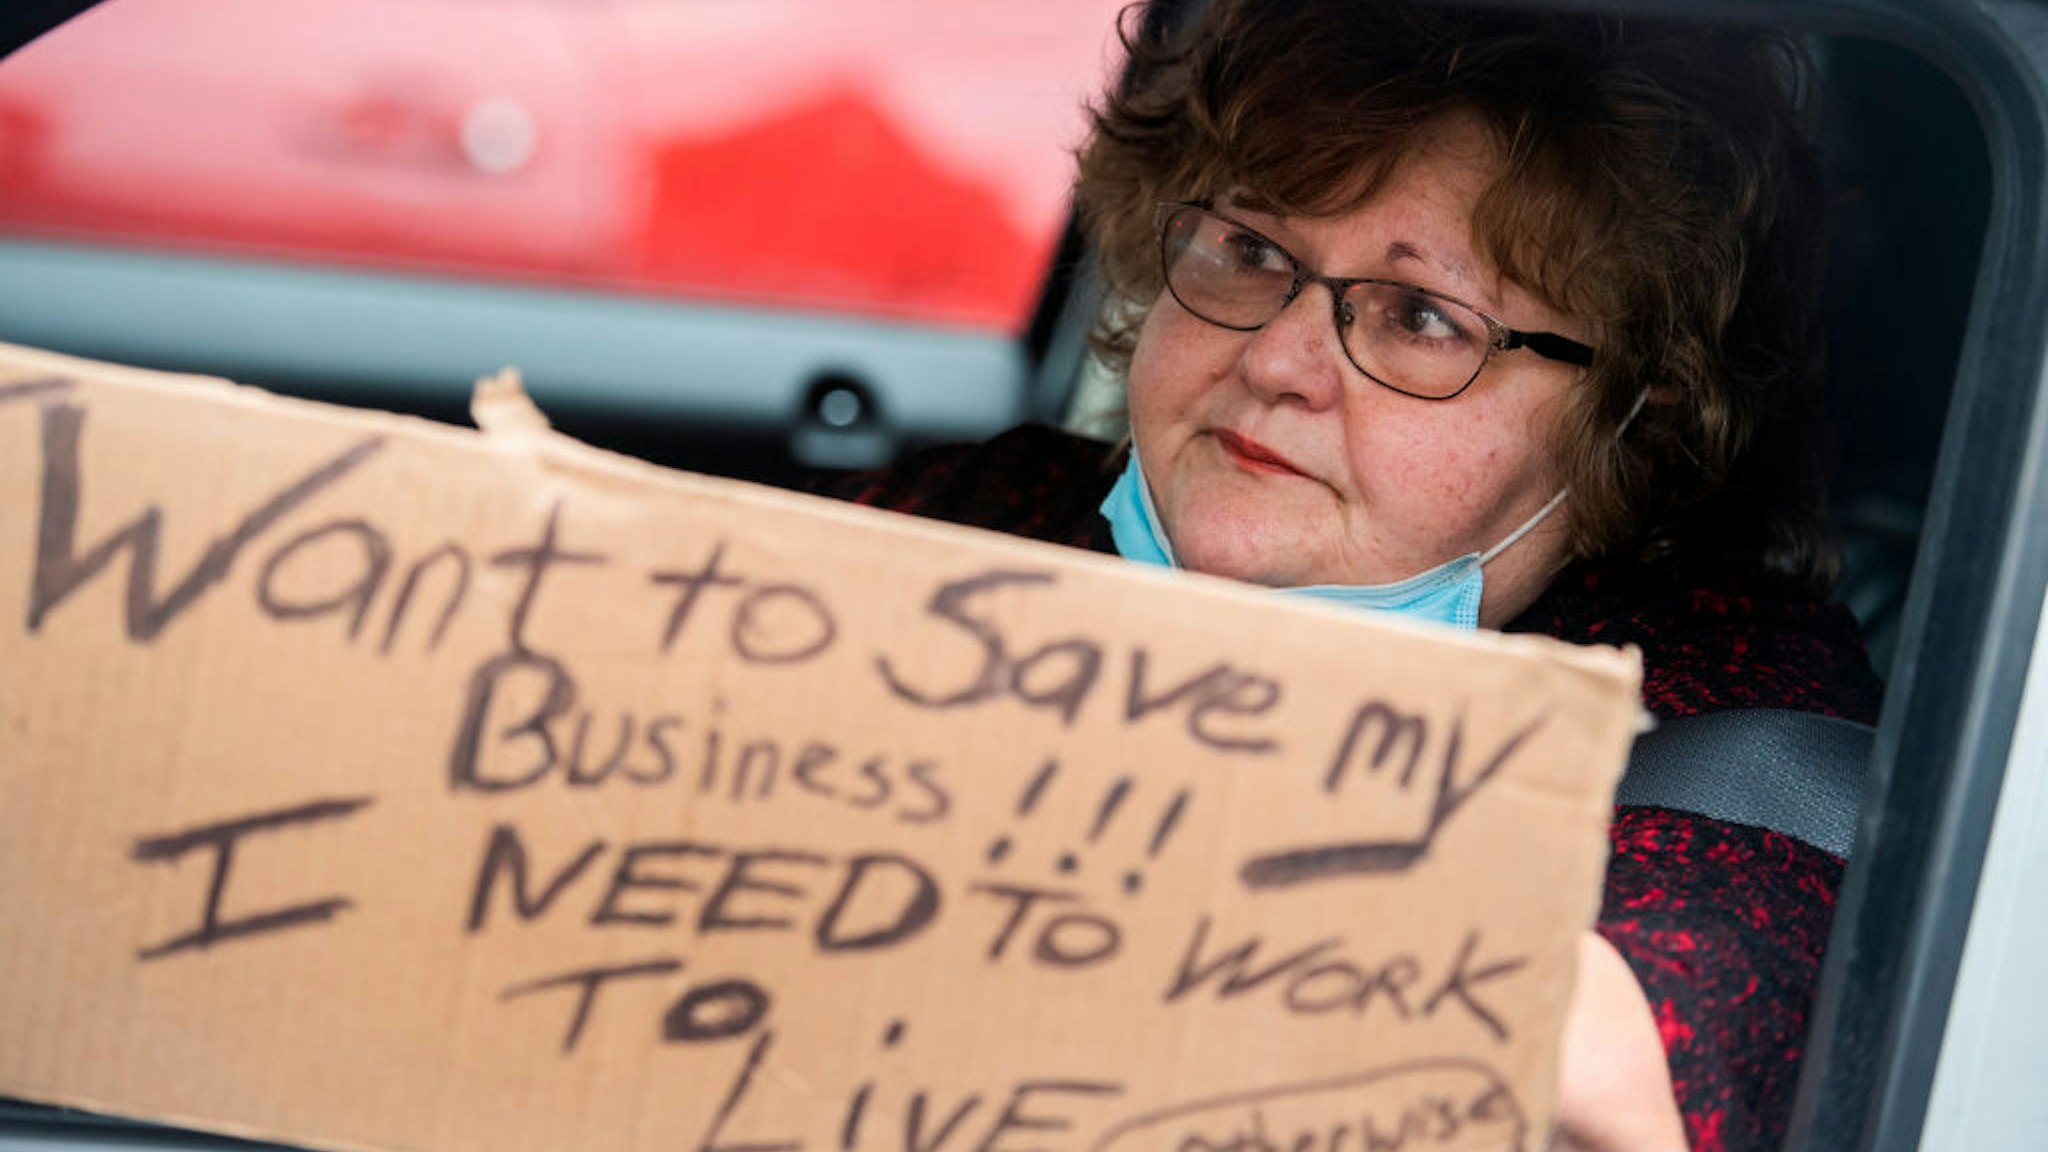 UNITED STATES - APRIL 18: Dolores Garrity, 61, a hair salon owner, demands that Gov. Larry Hogan (R) lift restrictions that have closed certain businesses in Maryland since the coronavirus outbreak on Church Circle in Annapolis, Md., on Saturday, April 18, 2020. The event titled Operation Gridlock Annapolis was hosted by the Patriot Picket and Reopen Maryland. (Photo By Tom Williams/CQ-Roll Call, Inc via Getty Images)